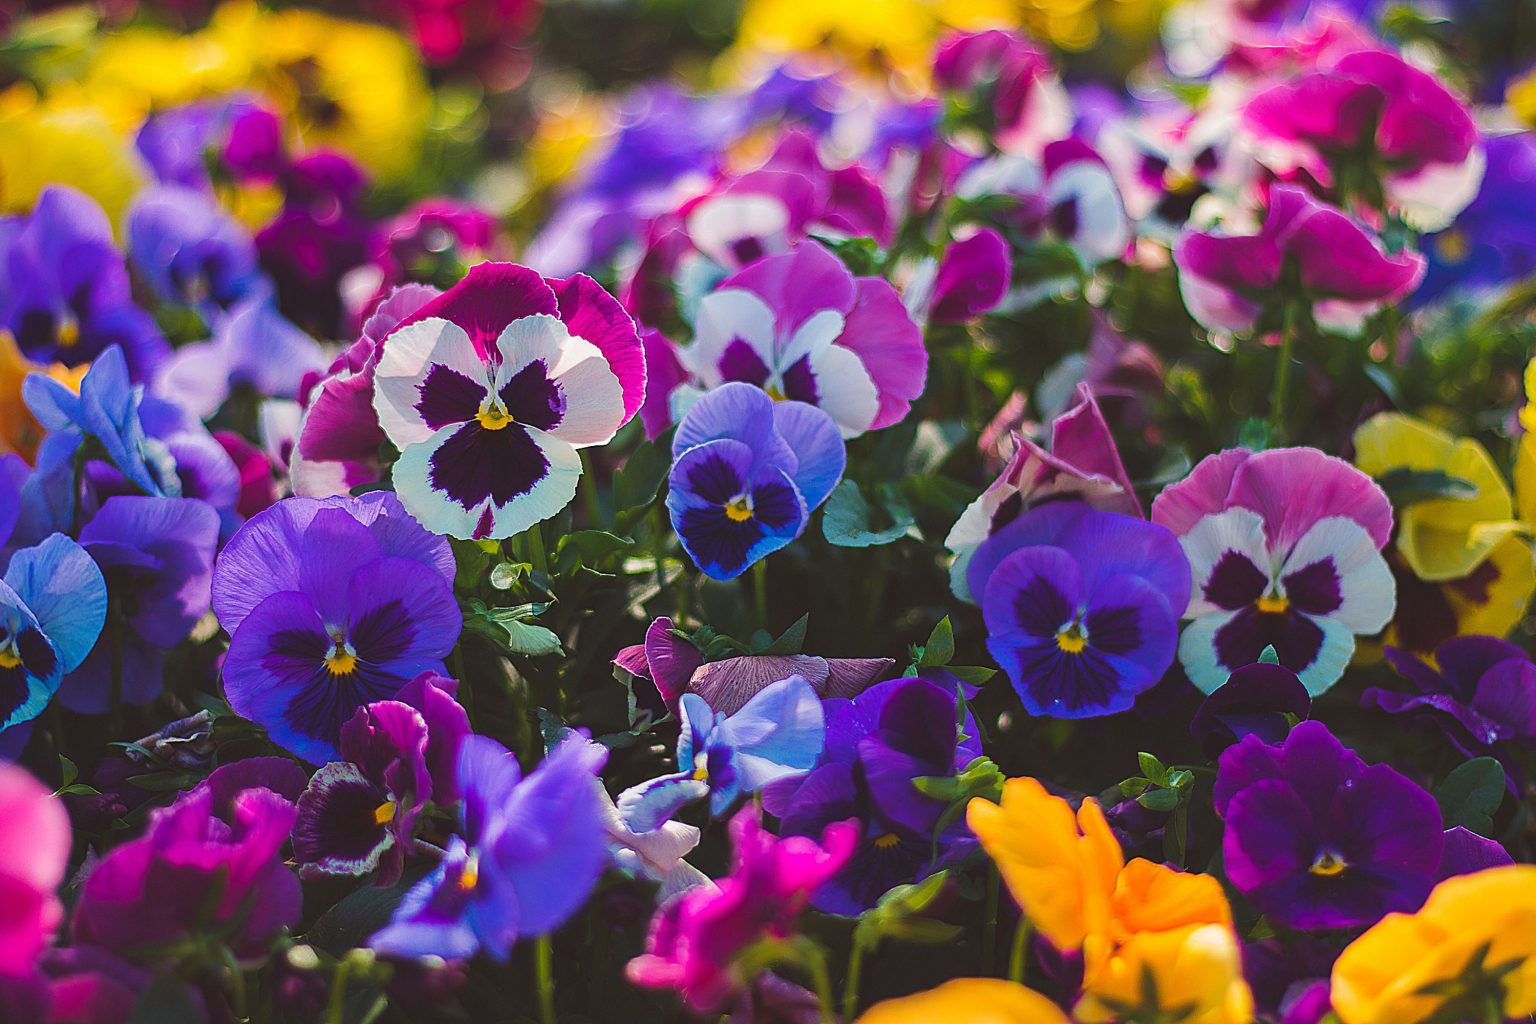 Winter Pansies Are The Perfect Perky Flowers To Brighten Up Your Space